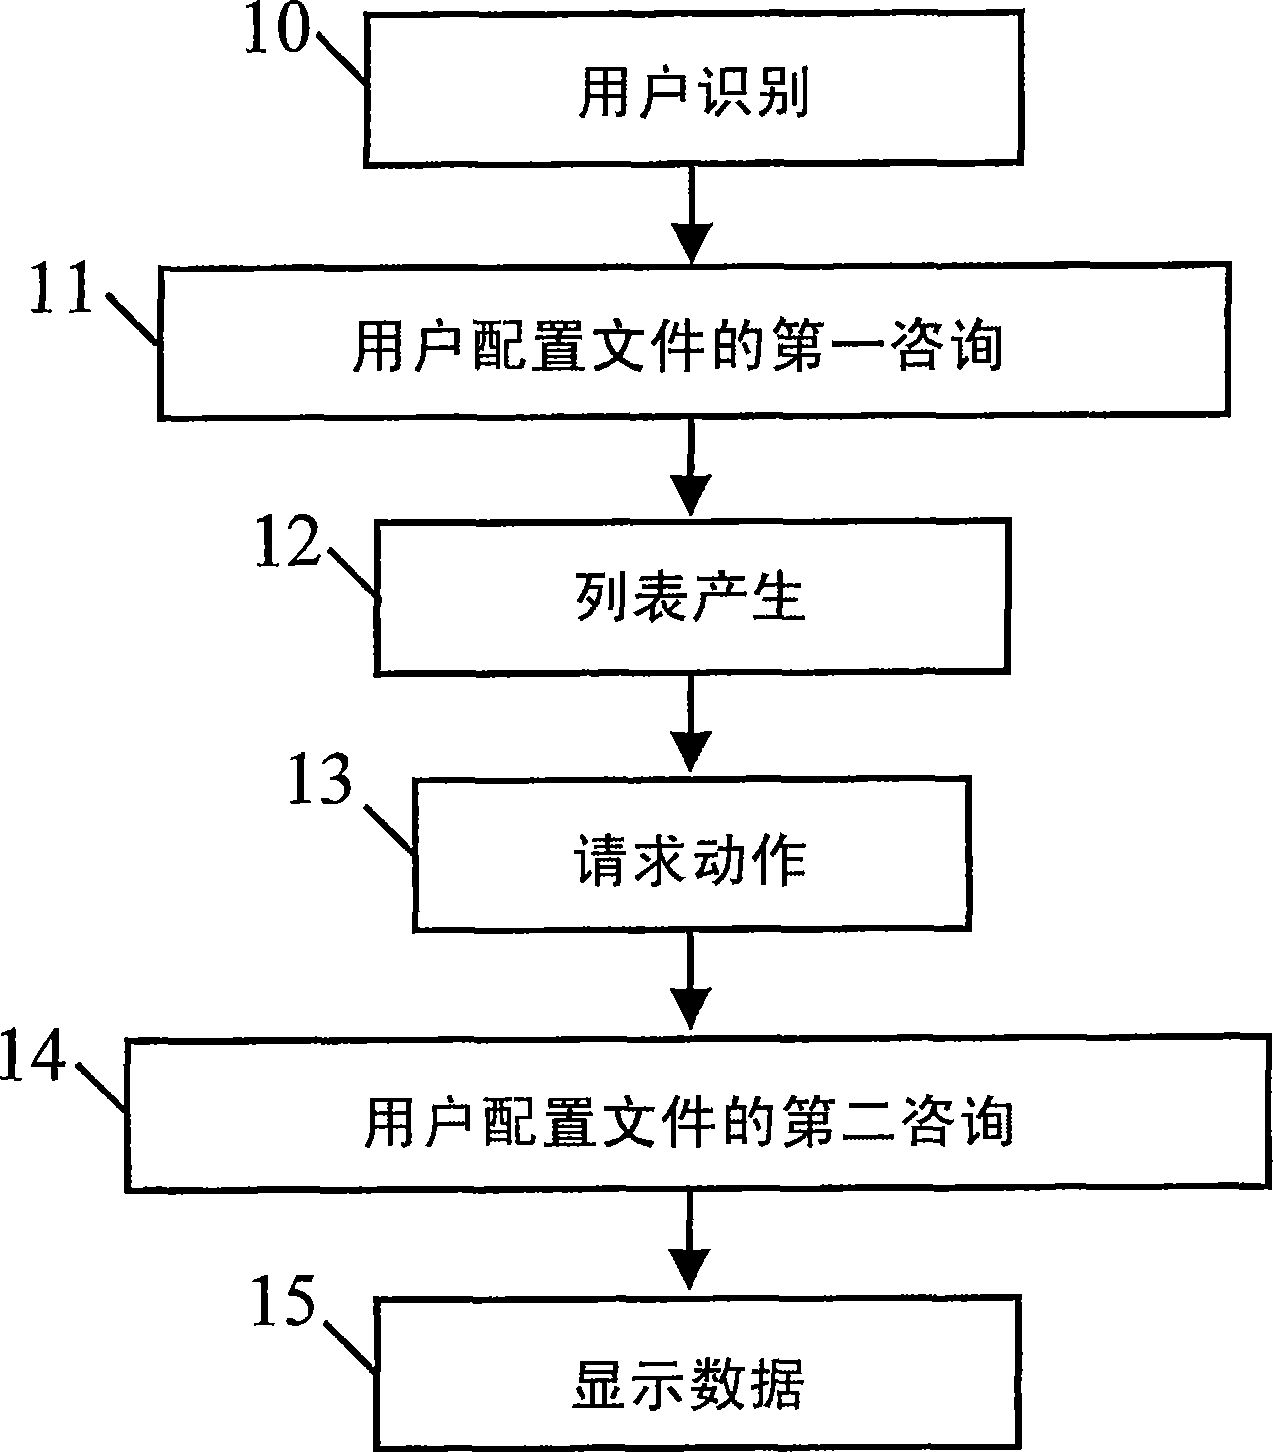 Method and system for direct and persistent access to digital medical data